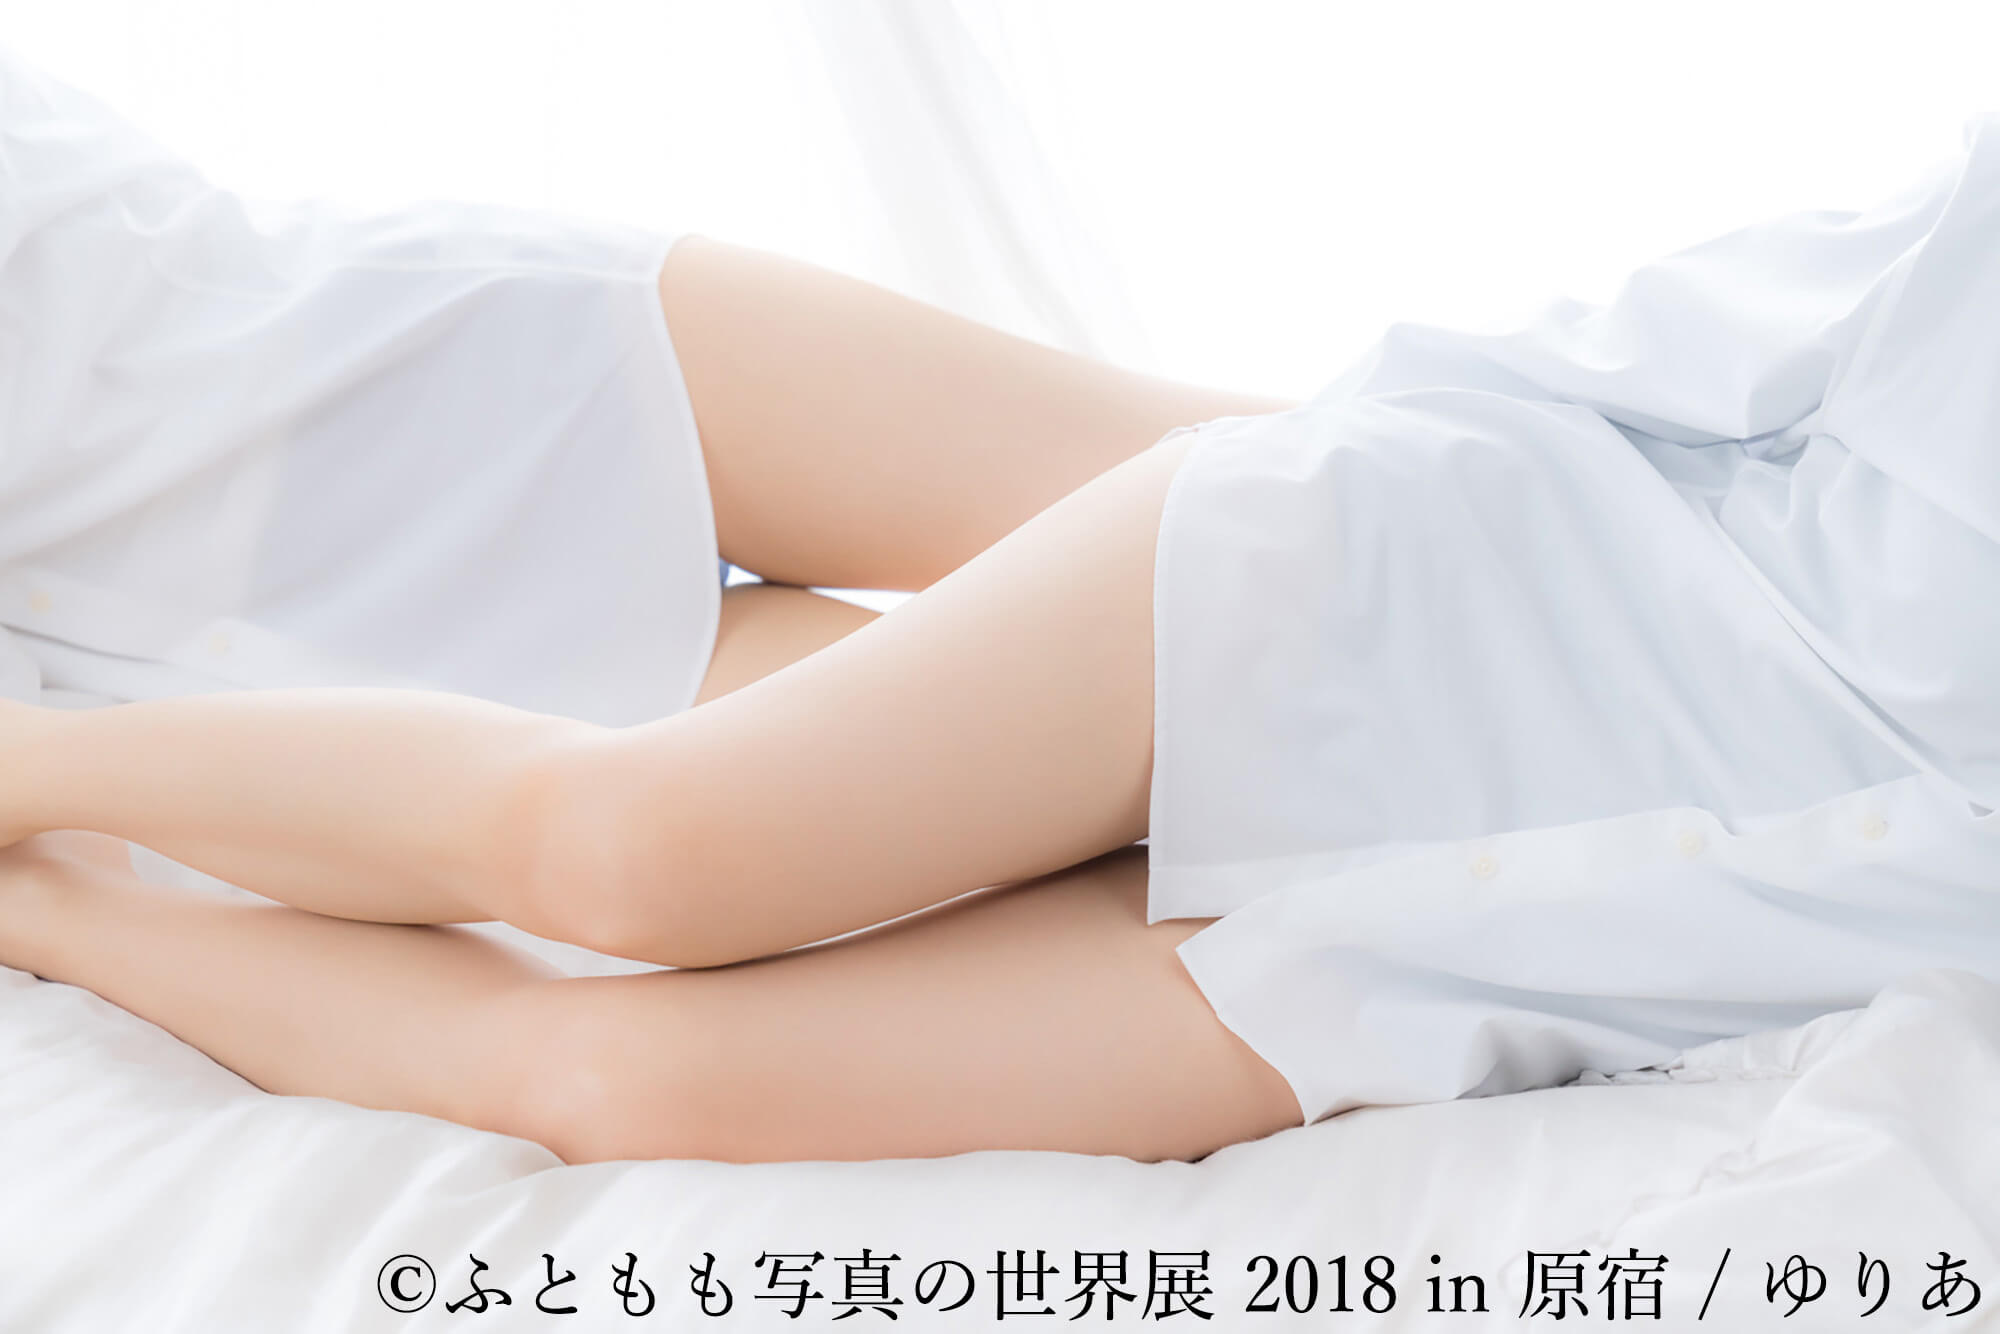 “The World of Thigh Photos” Exhibition to Take Place in Harajuku